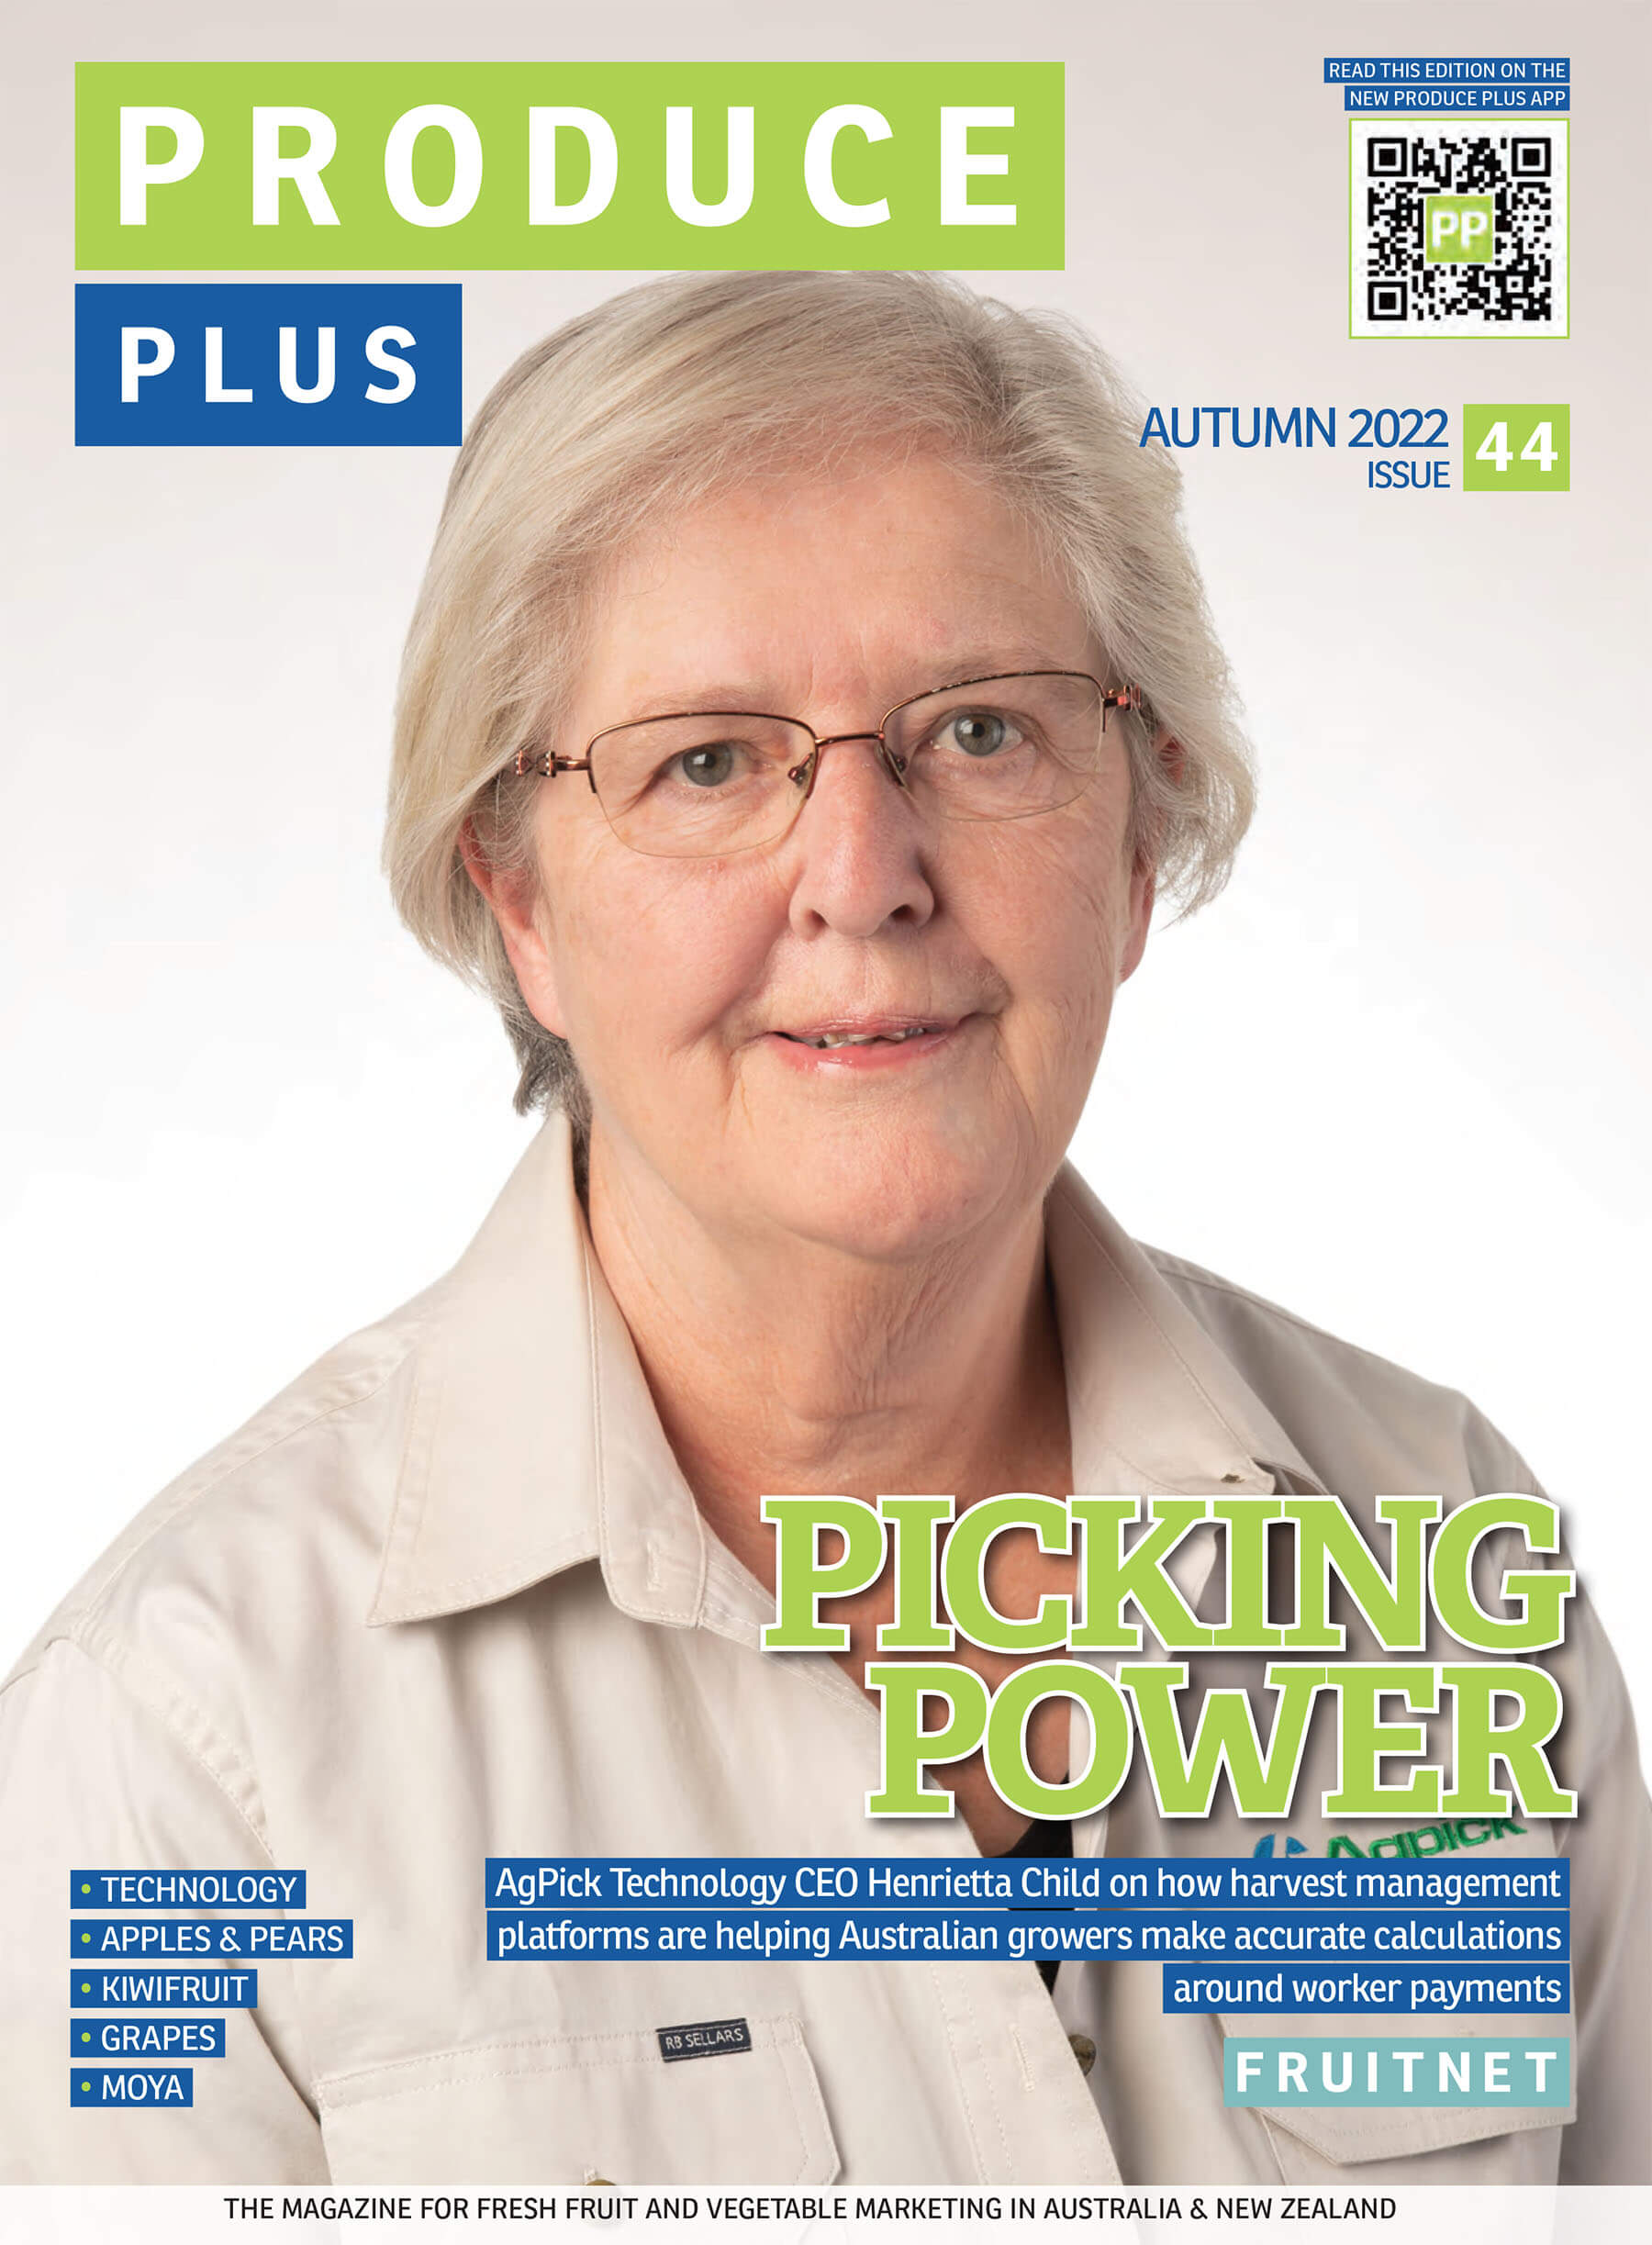 Produce Plus Front Page - Picking Power - AgPick